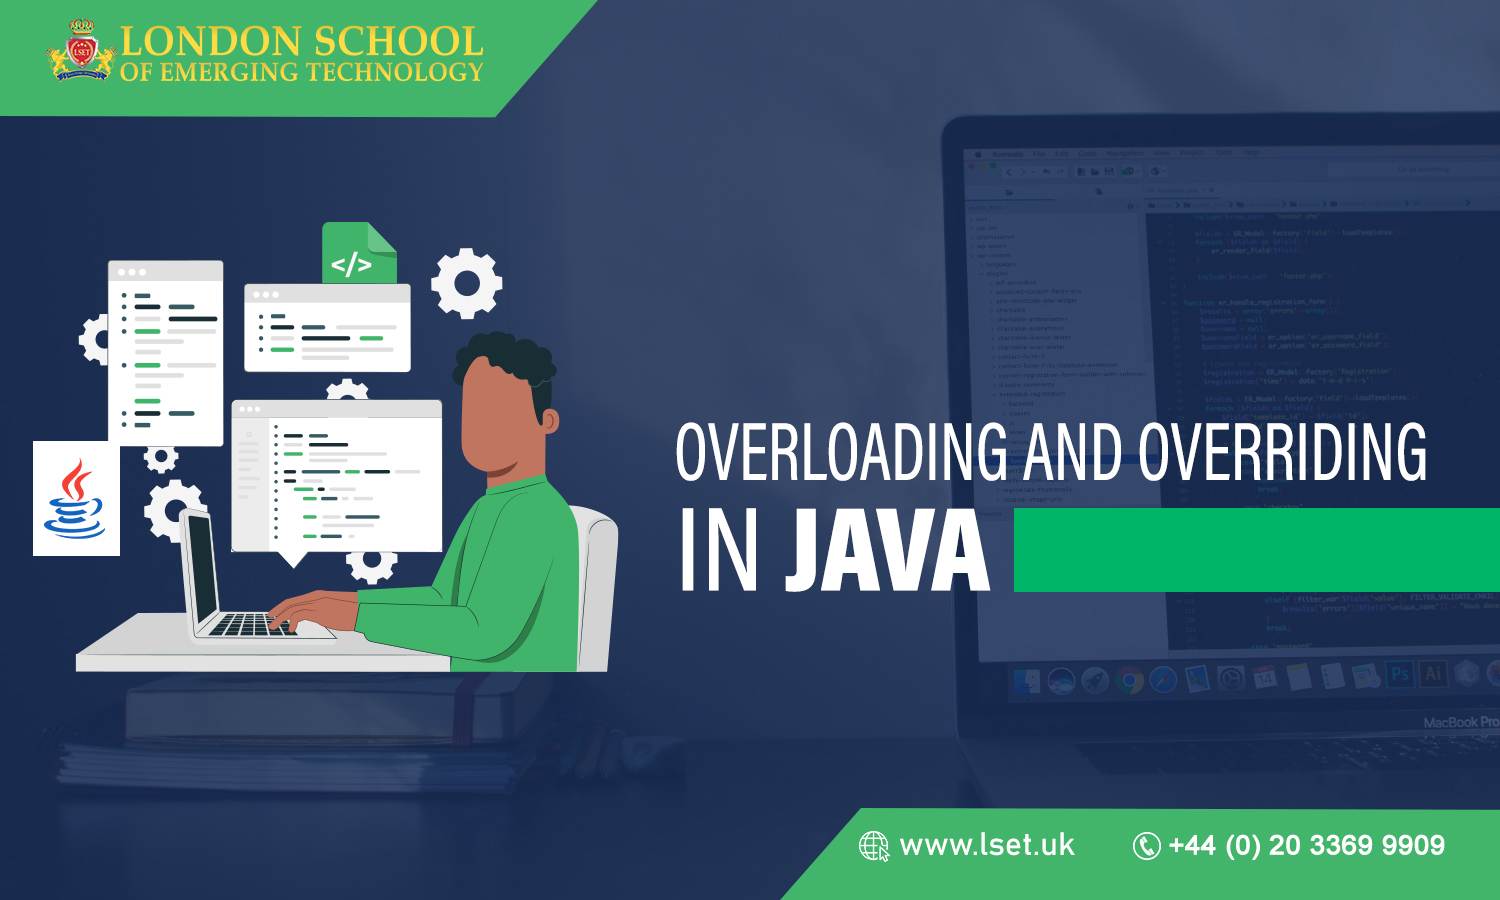 Overloading and overriding in java